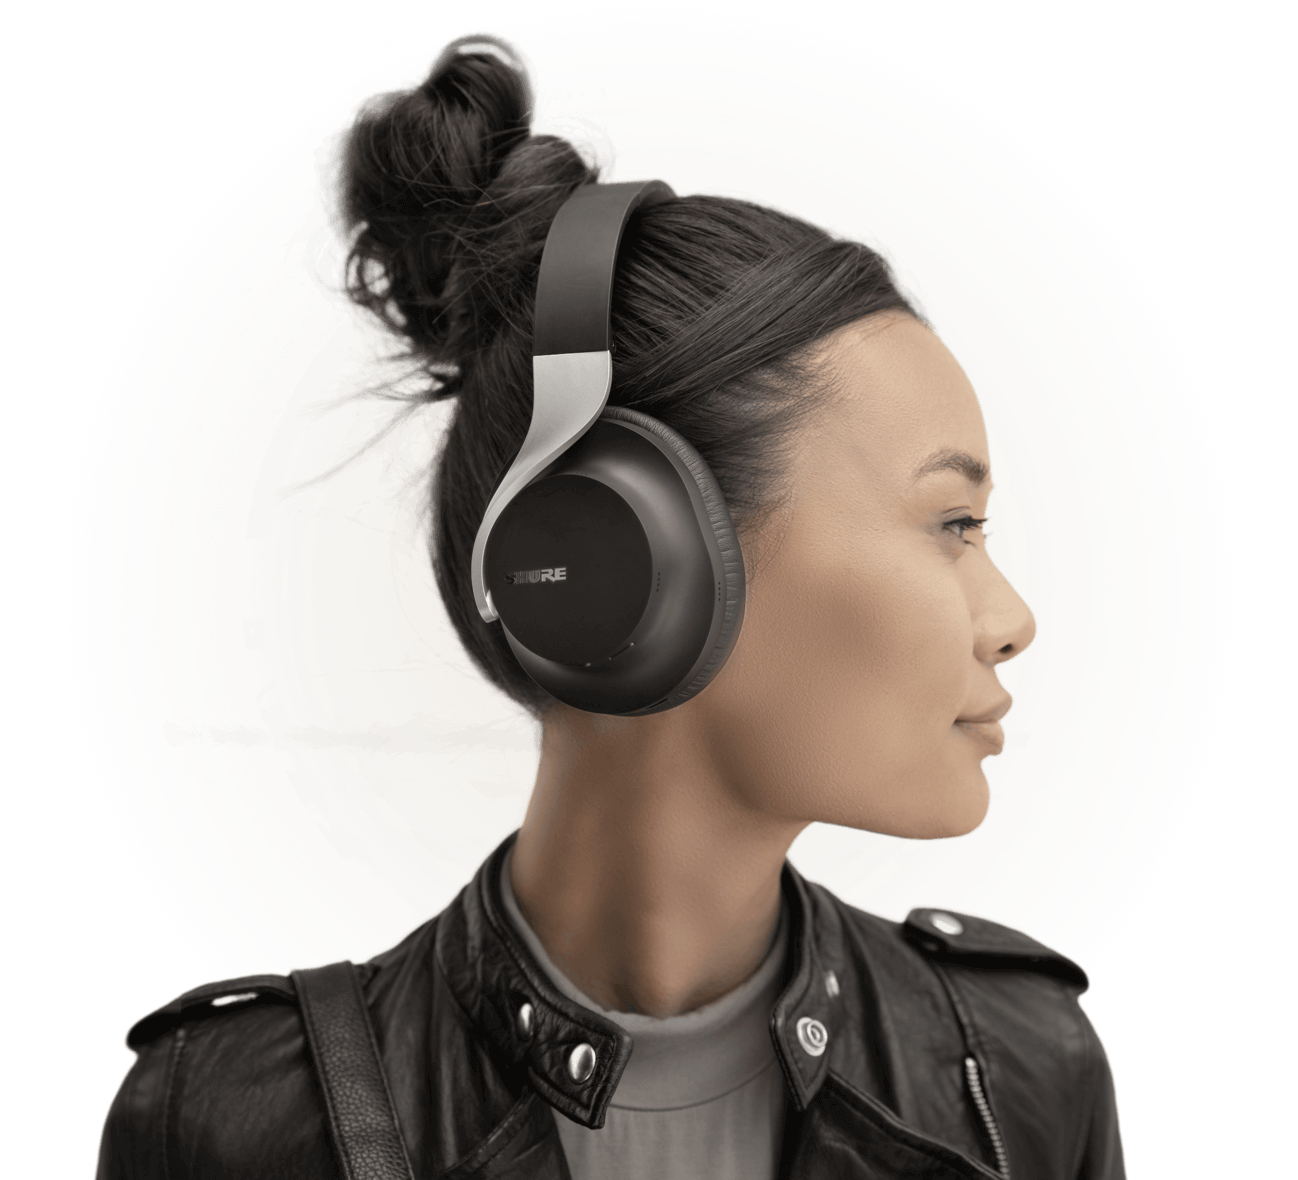 Shure Introduces AONIC 40 Wireless Noise Cancelling Headphones